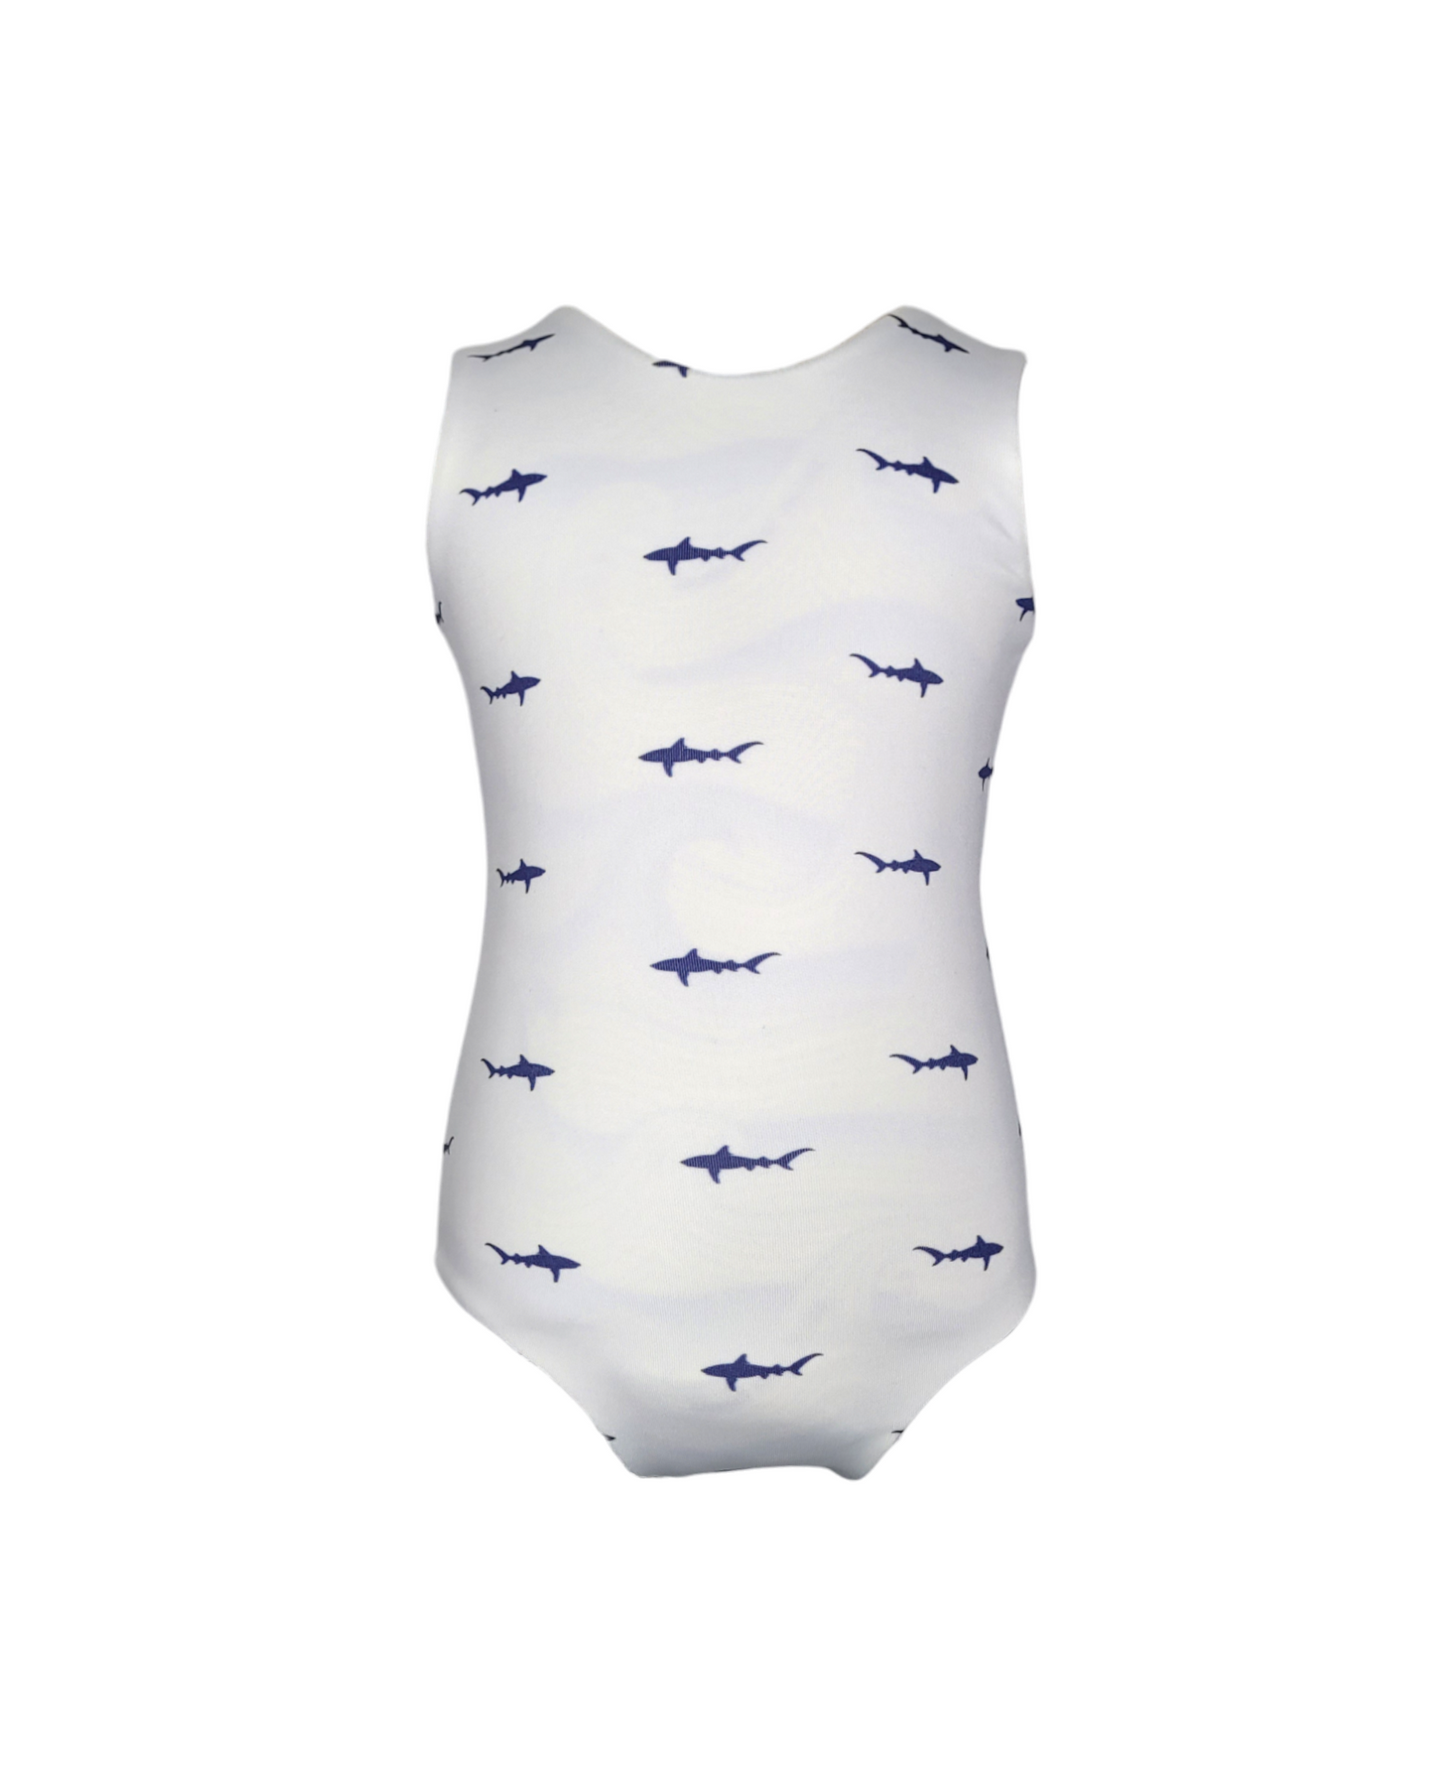 Girls Reversible Swimsuit. White with small blue sharks.